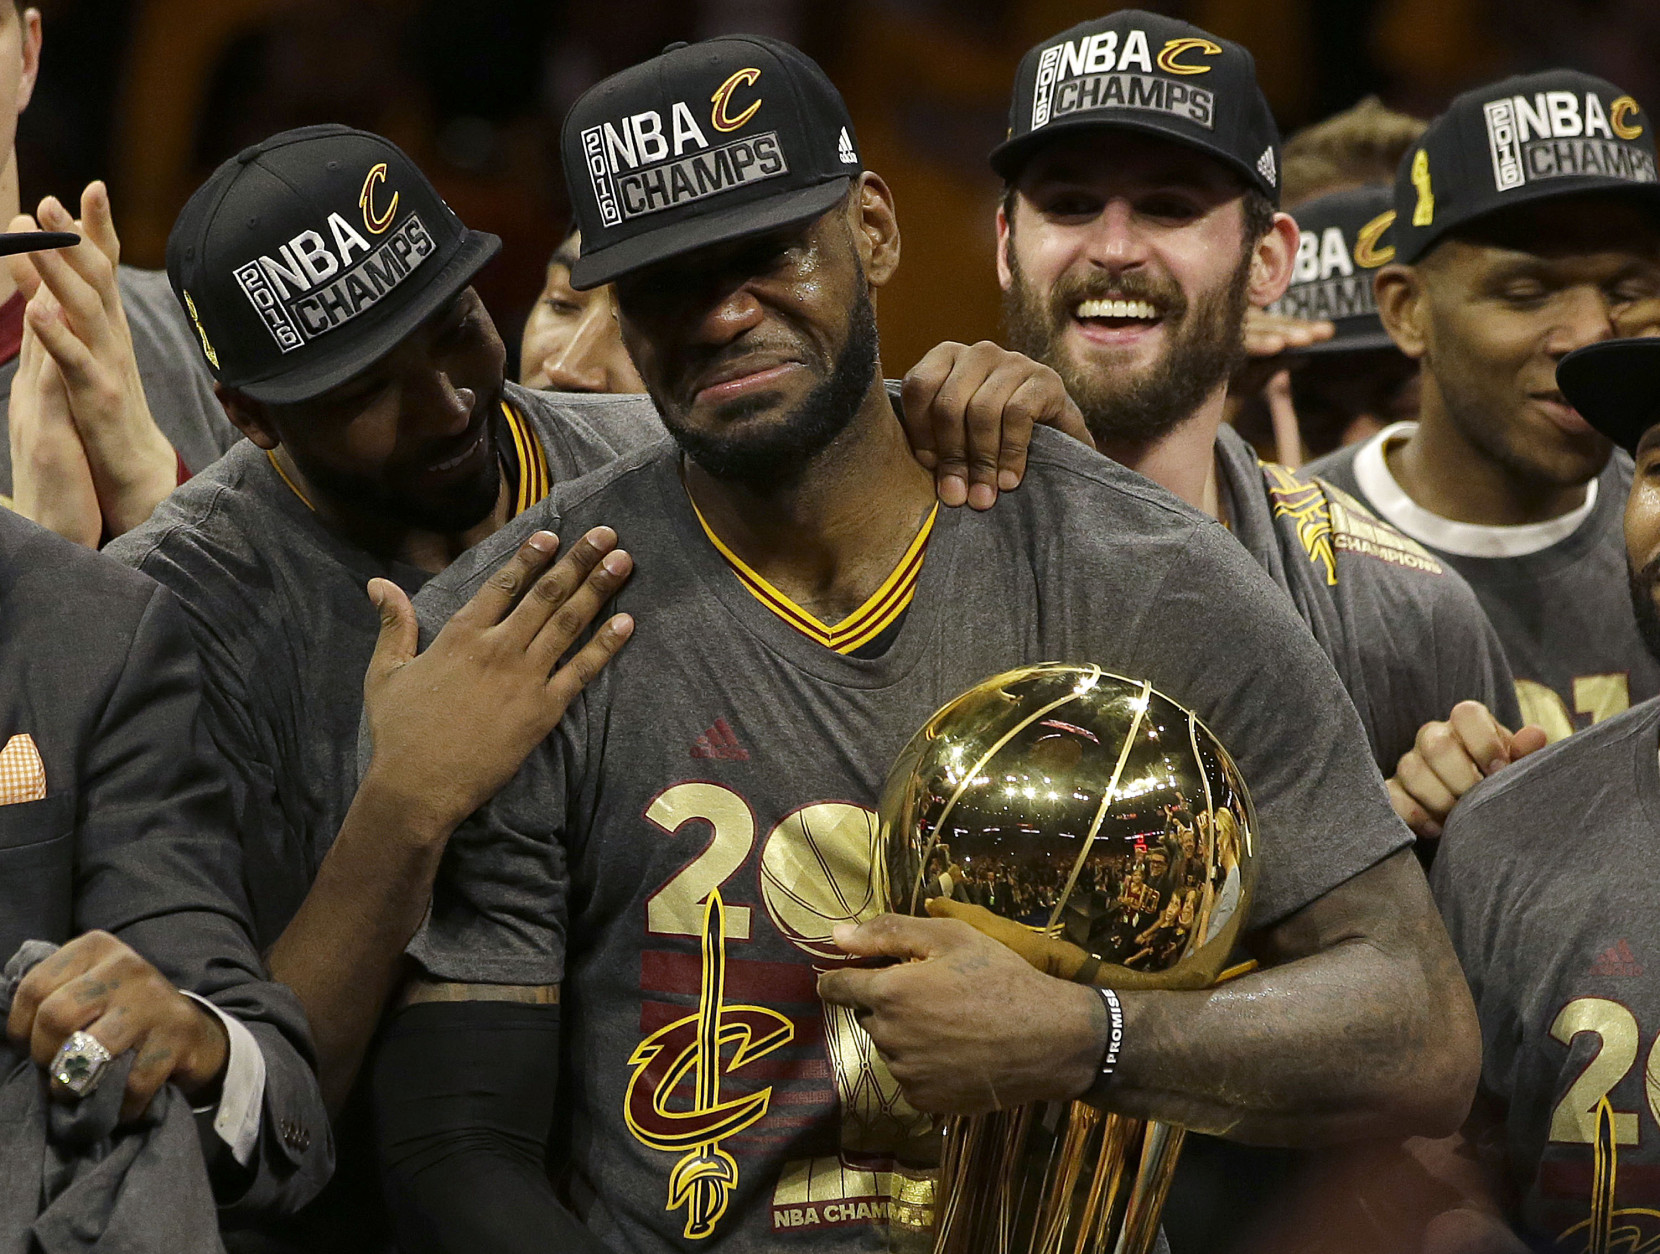 Cleveland Cavaliers forward LeBron James, center, celebrates with teammates after Game 7 of basketball's NBA Finals against the Golden State Warriors in Oakland, Calif., Sunday, June 19, 2016. The Cavaliers won 93-89. (AP Photo/Marcio Jose Sanchez)